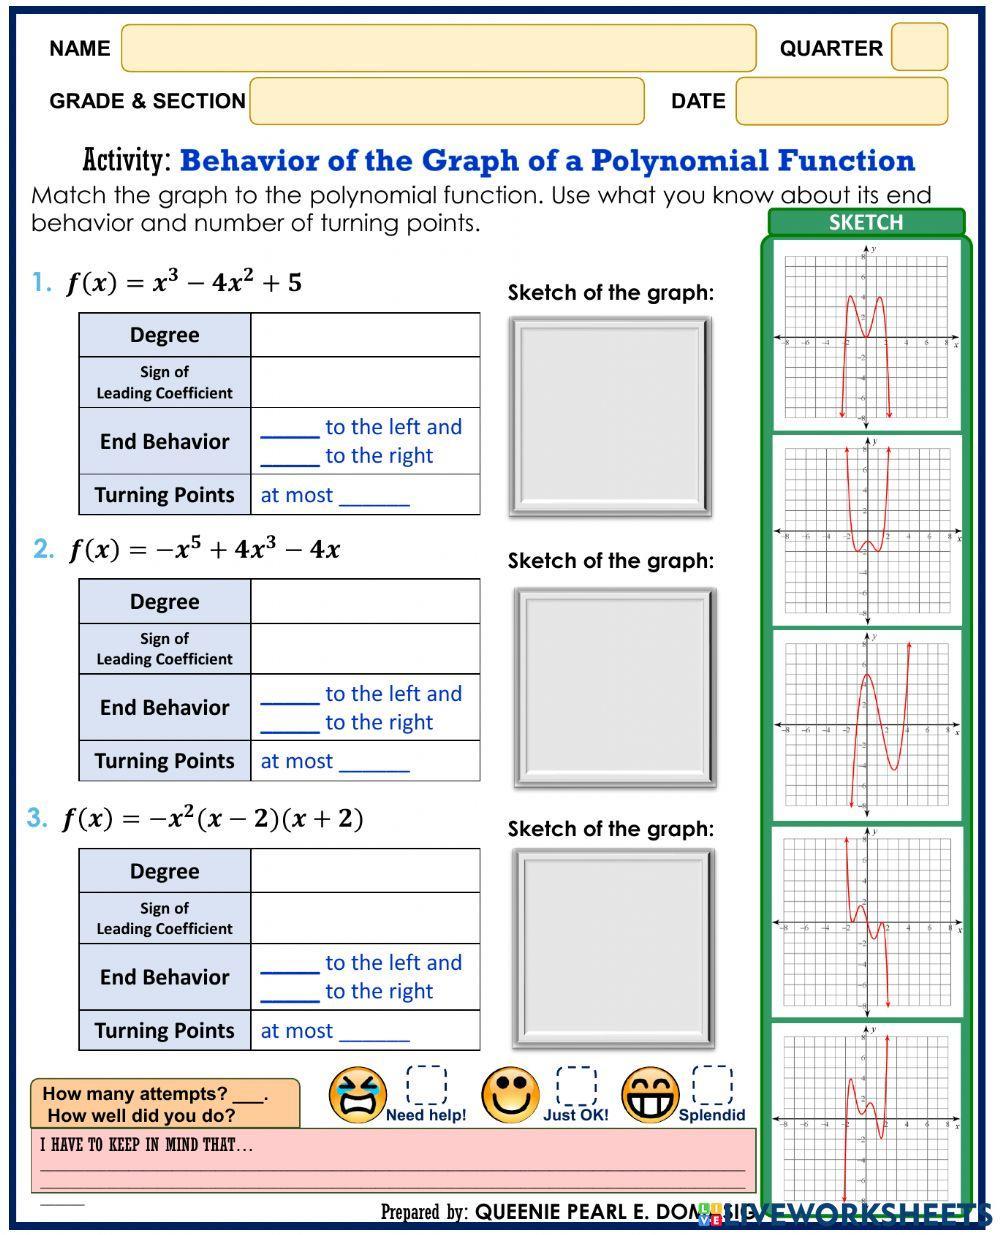 Behavior of the Graph of a Polynomial Function